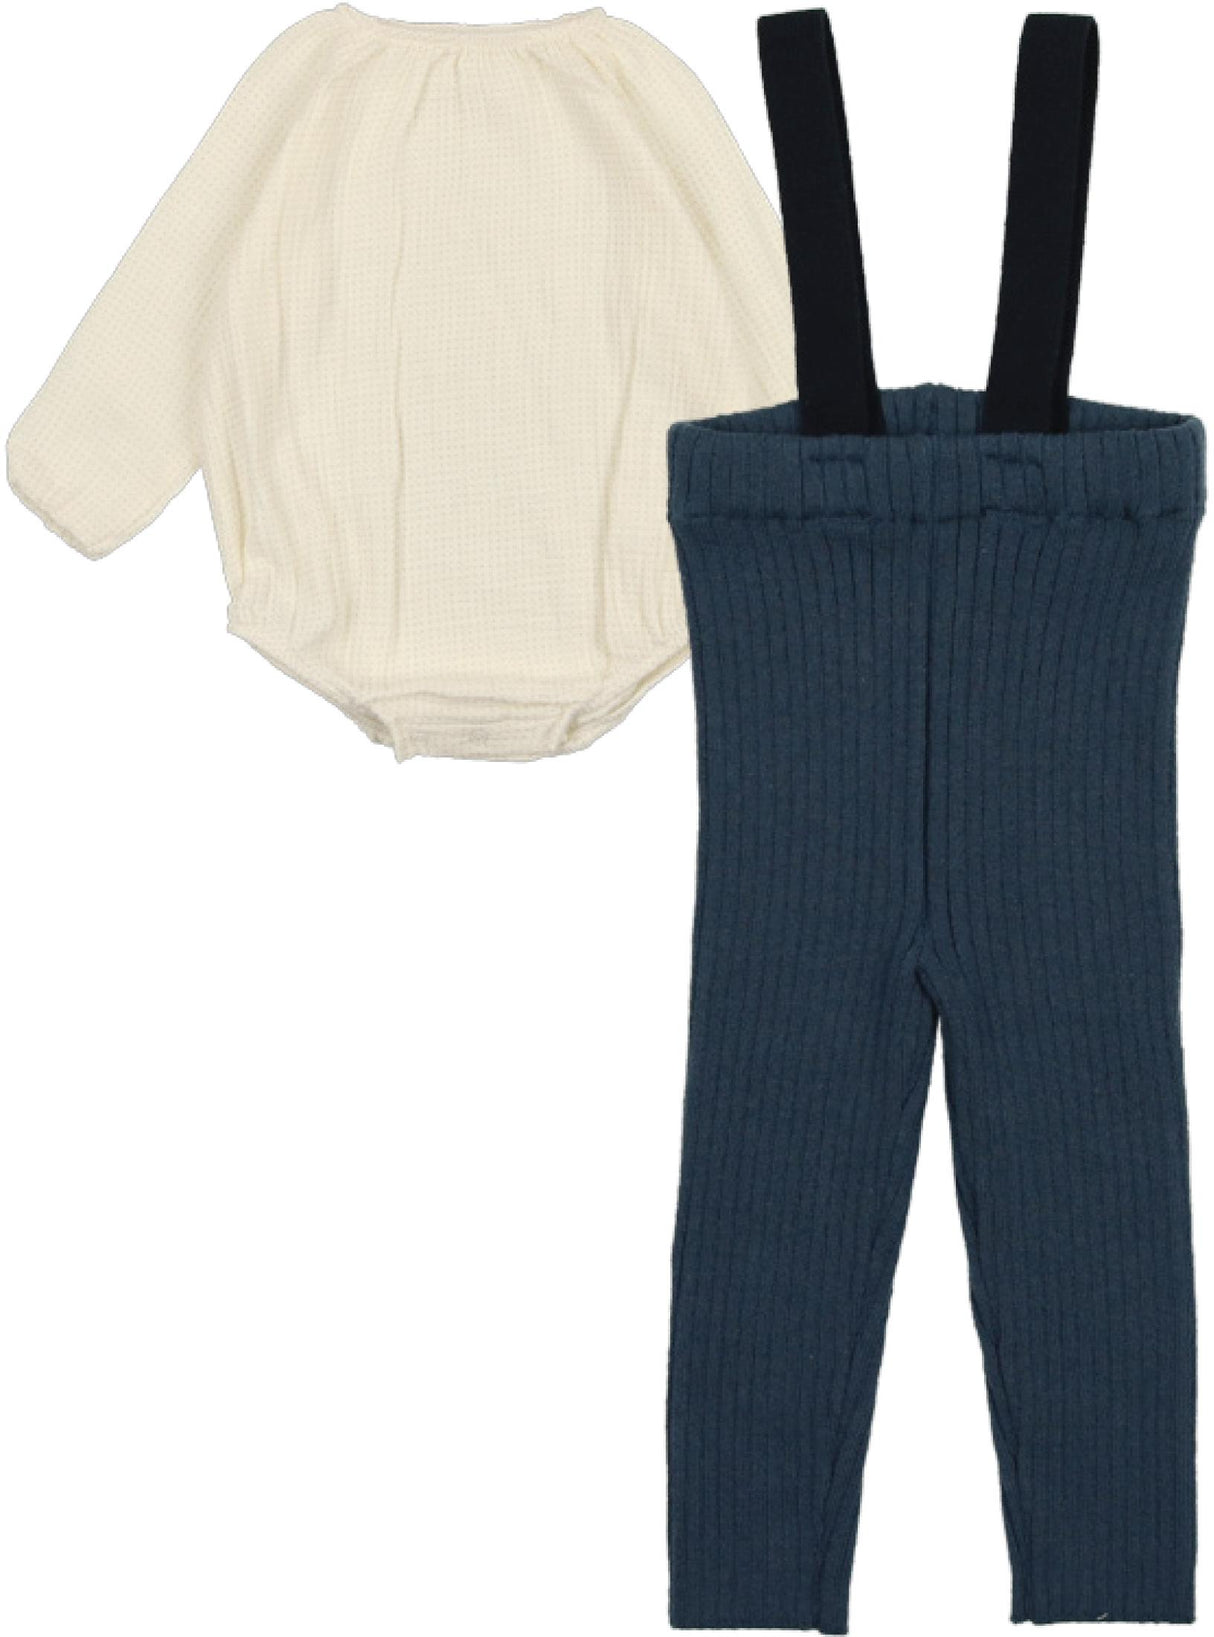 Analogie by Lil Legs Shabbos Collection Baby Toddler Boys Knit